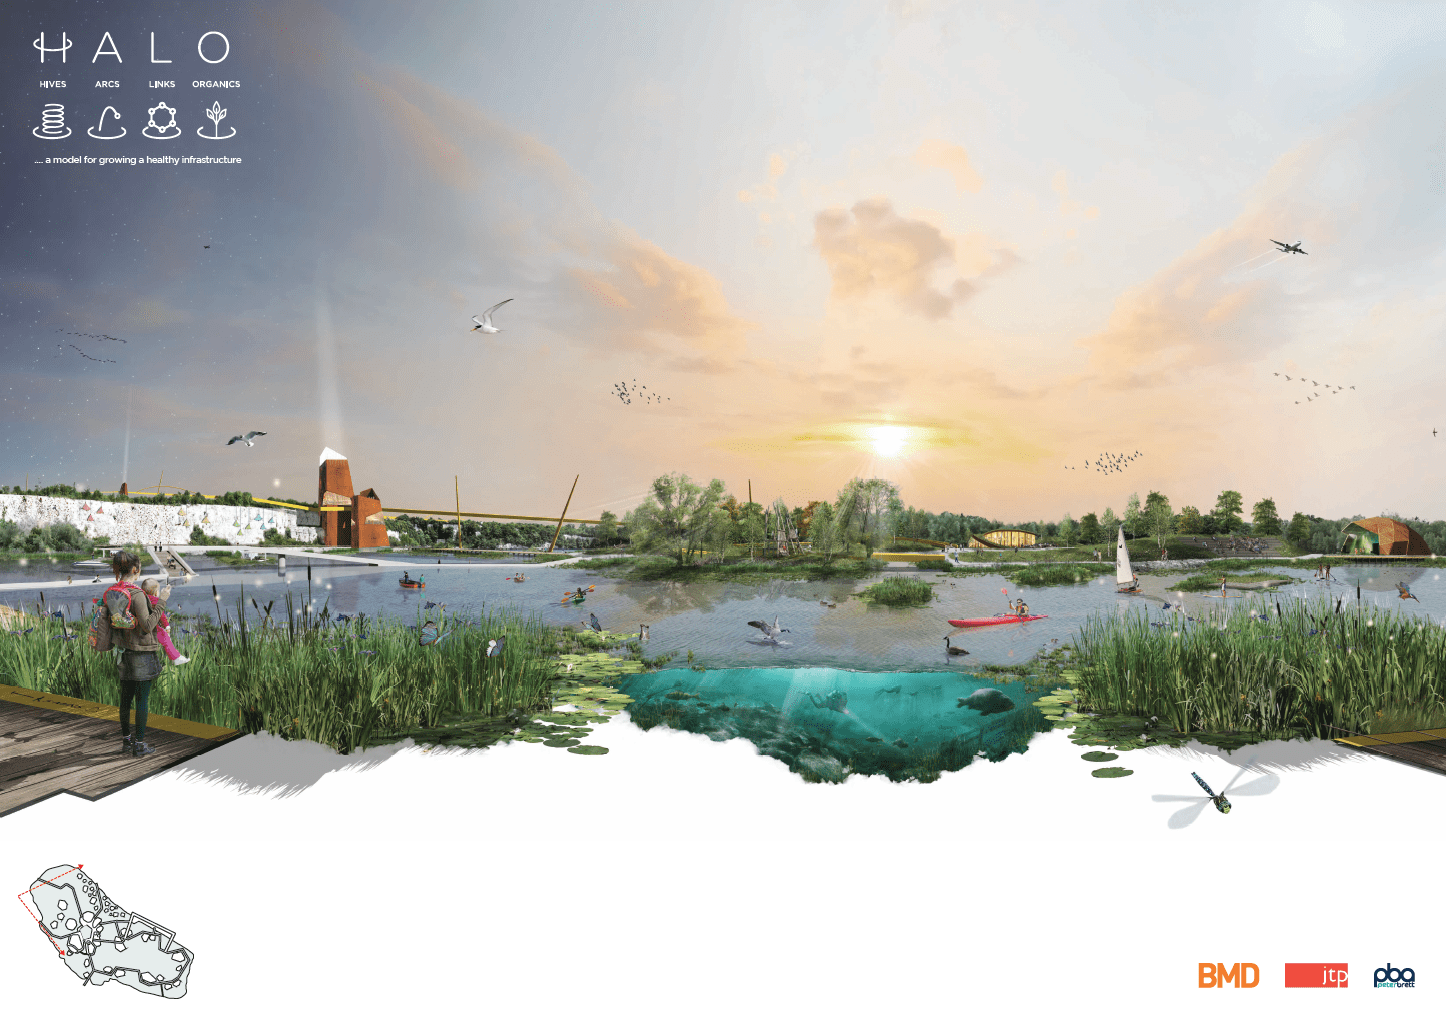 A photomontage of the lakeside development and activities proposed for Ebbsfleet international competition 